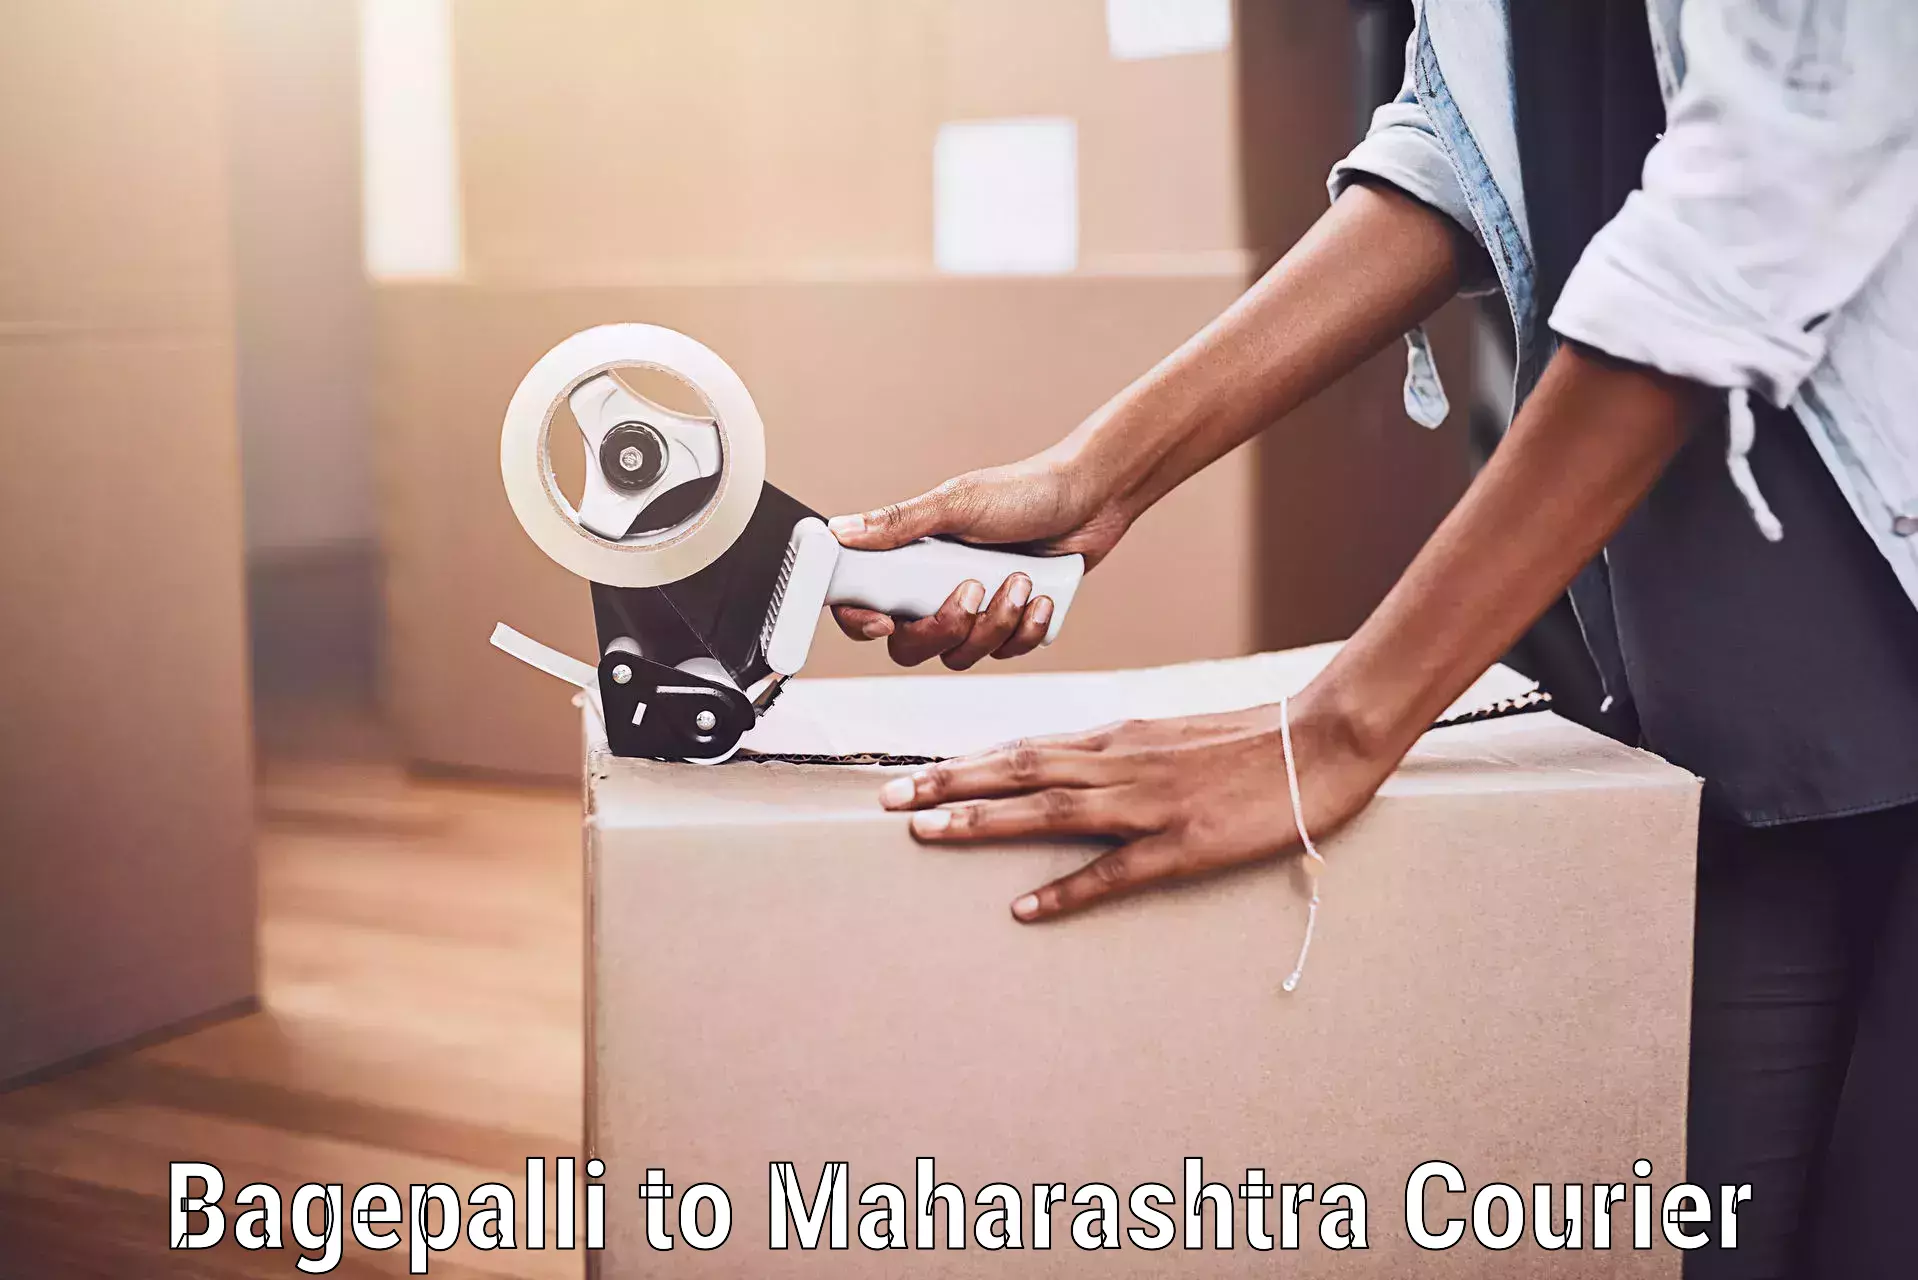 Baggage delivery planning Bagepalli to Maharashtra